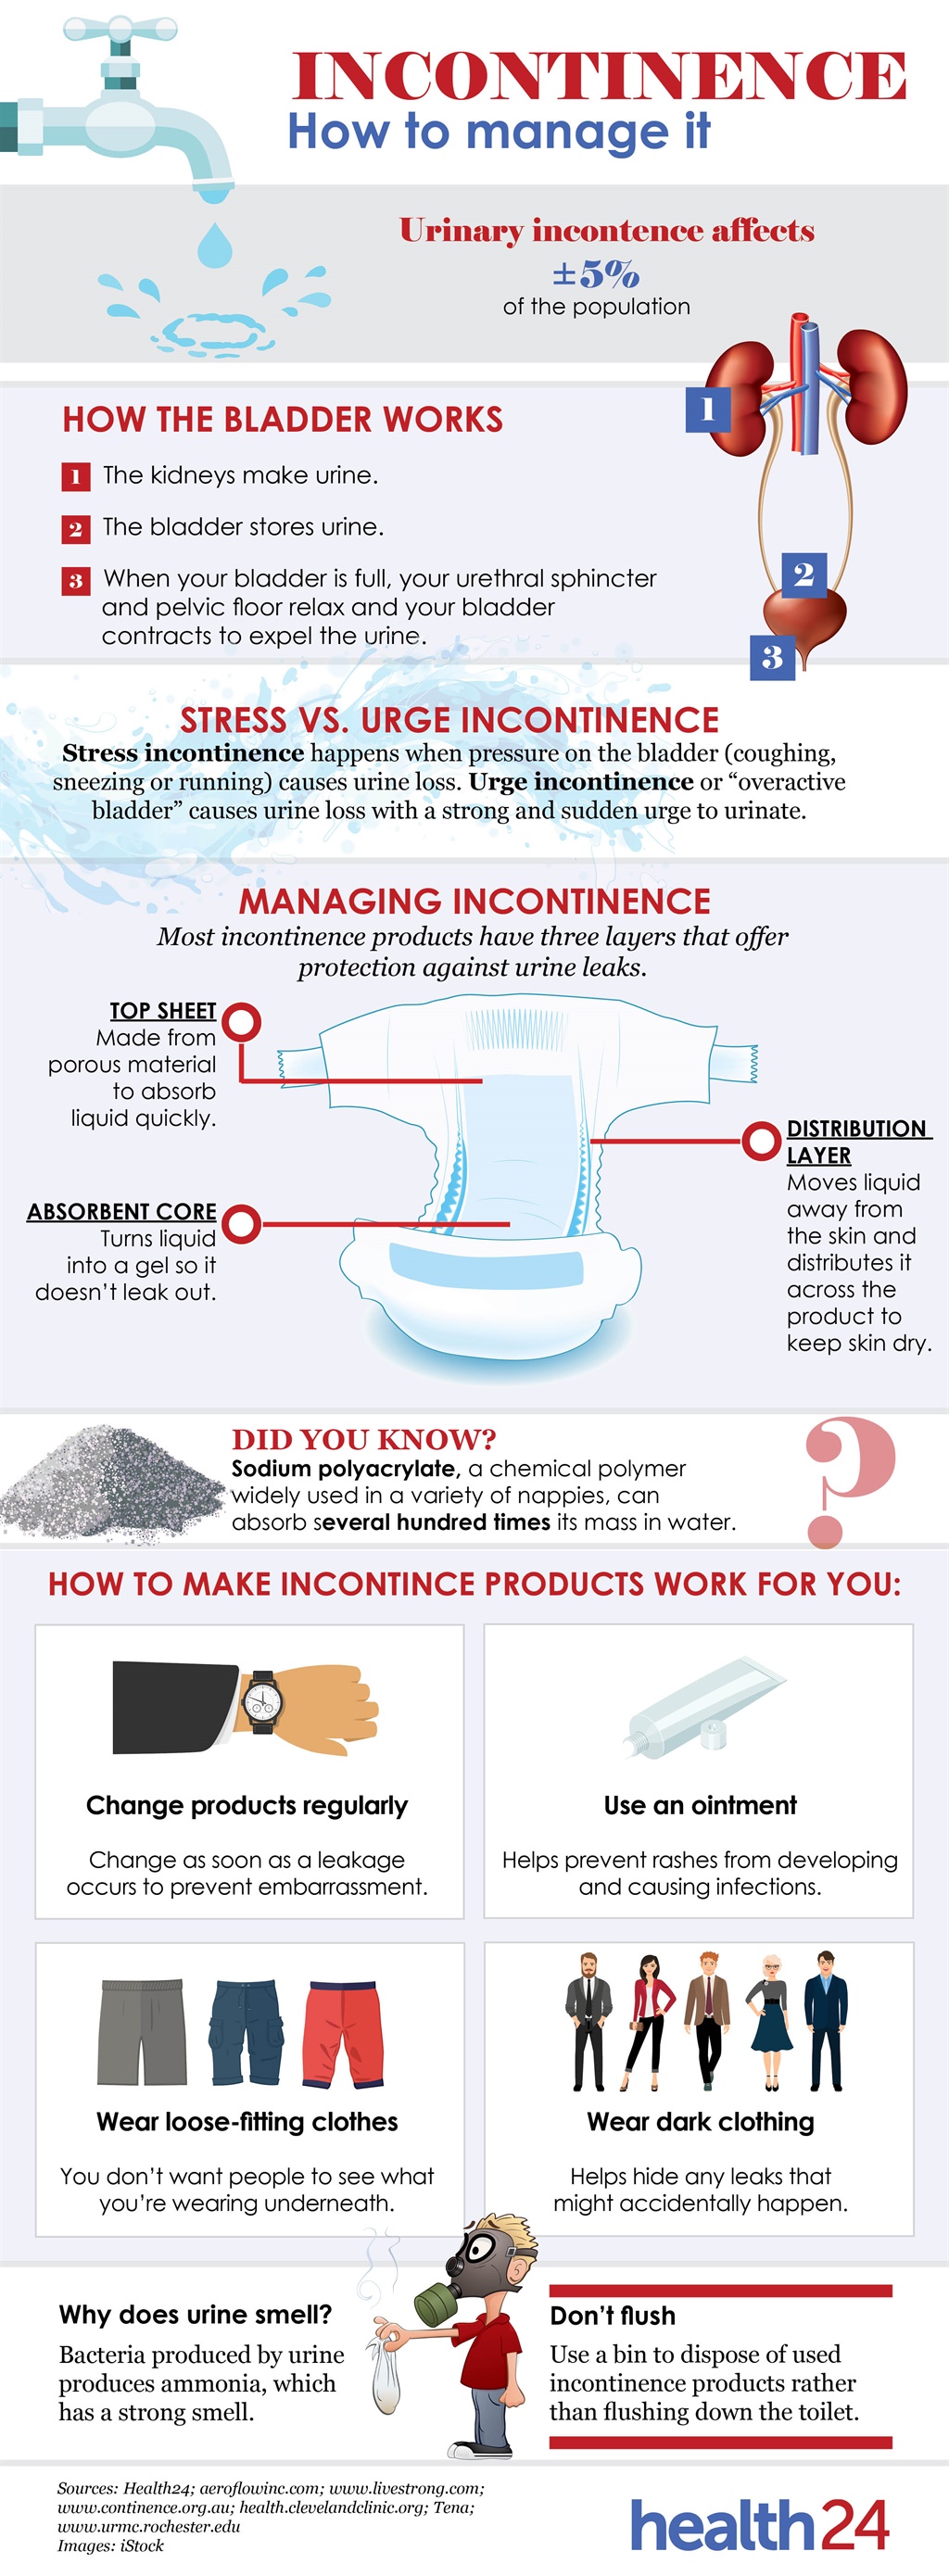 How an incontinence nappy works infographic